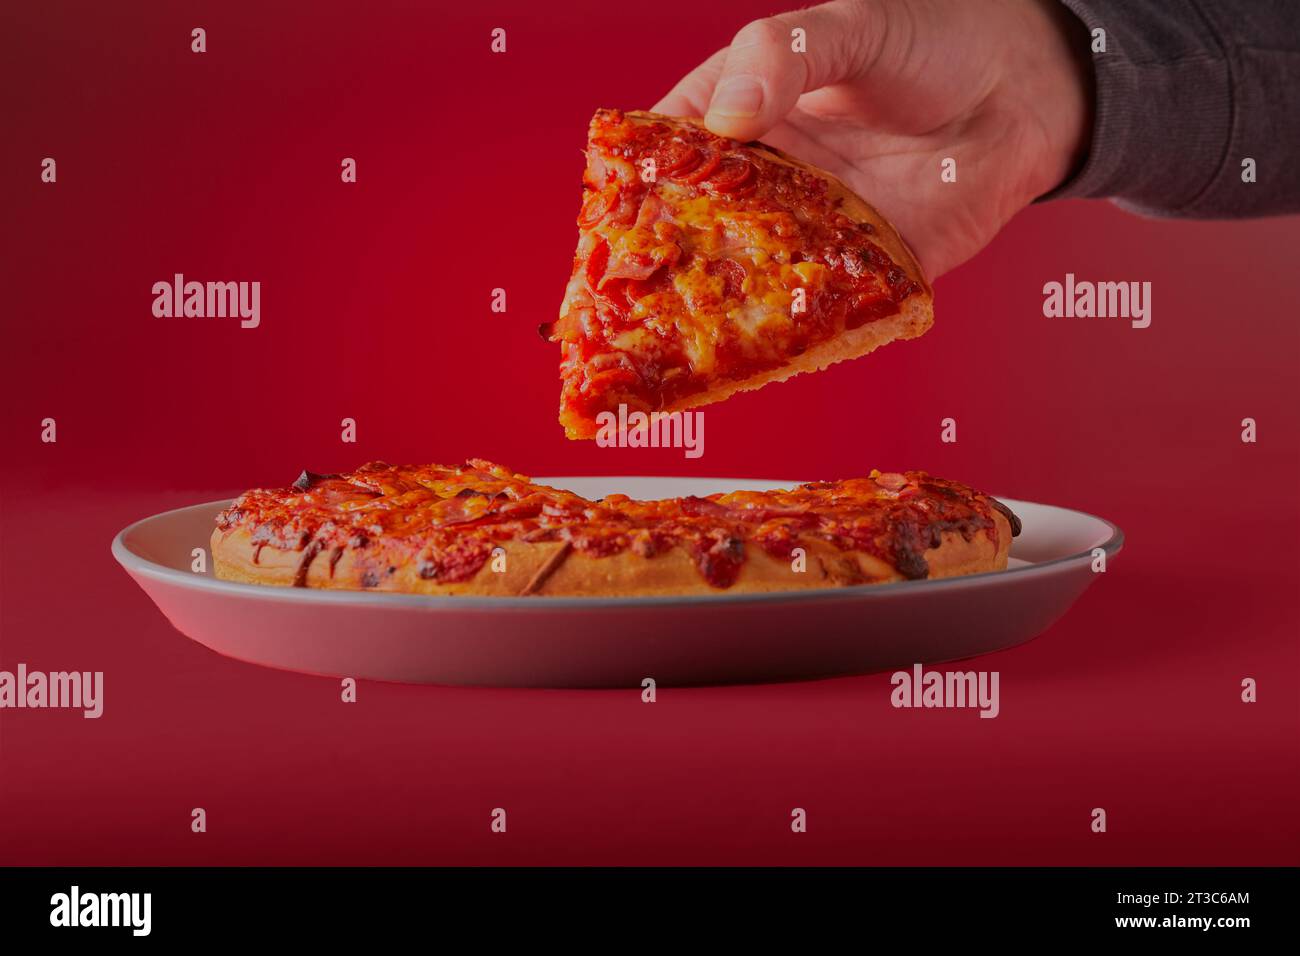 Freshly baked meaty,cheesy deep pan pizza, with a piece being held up with a red background. Stock Photo